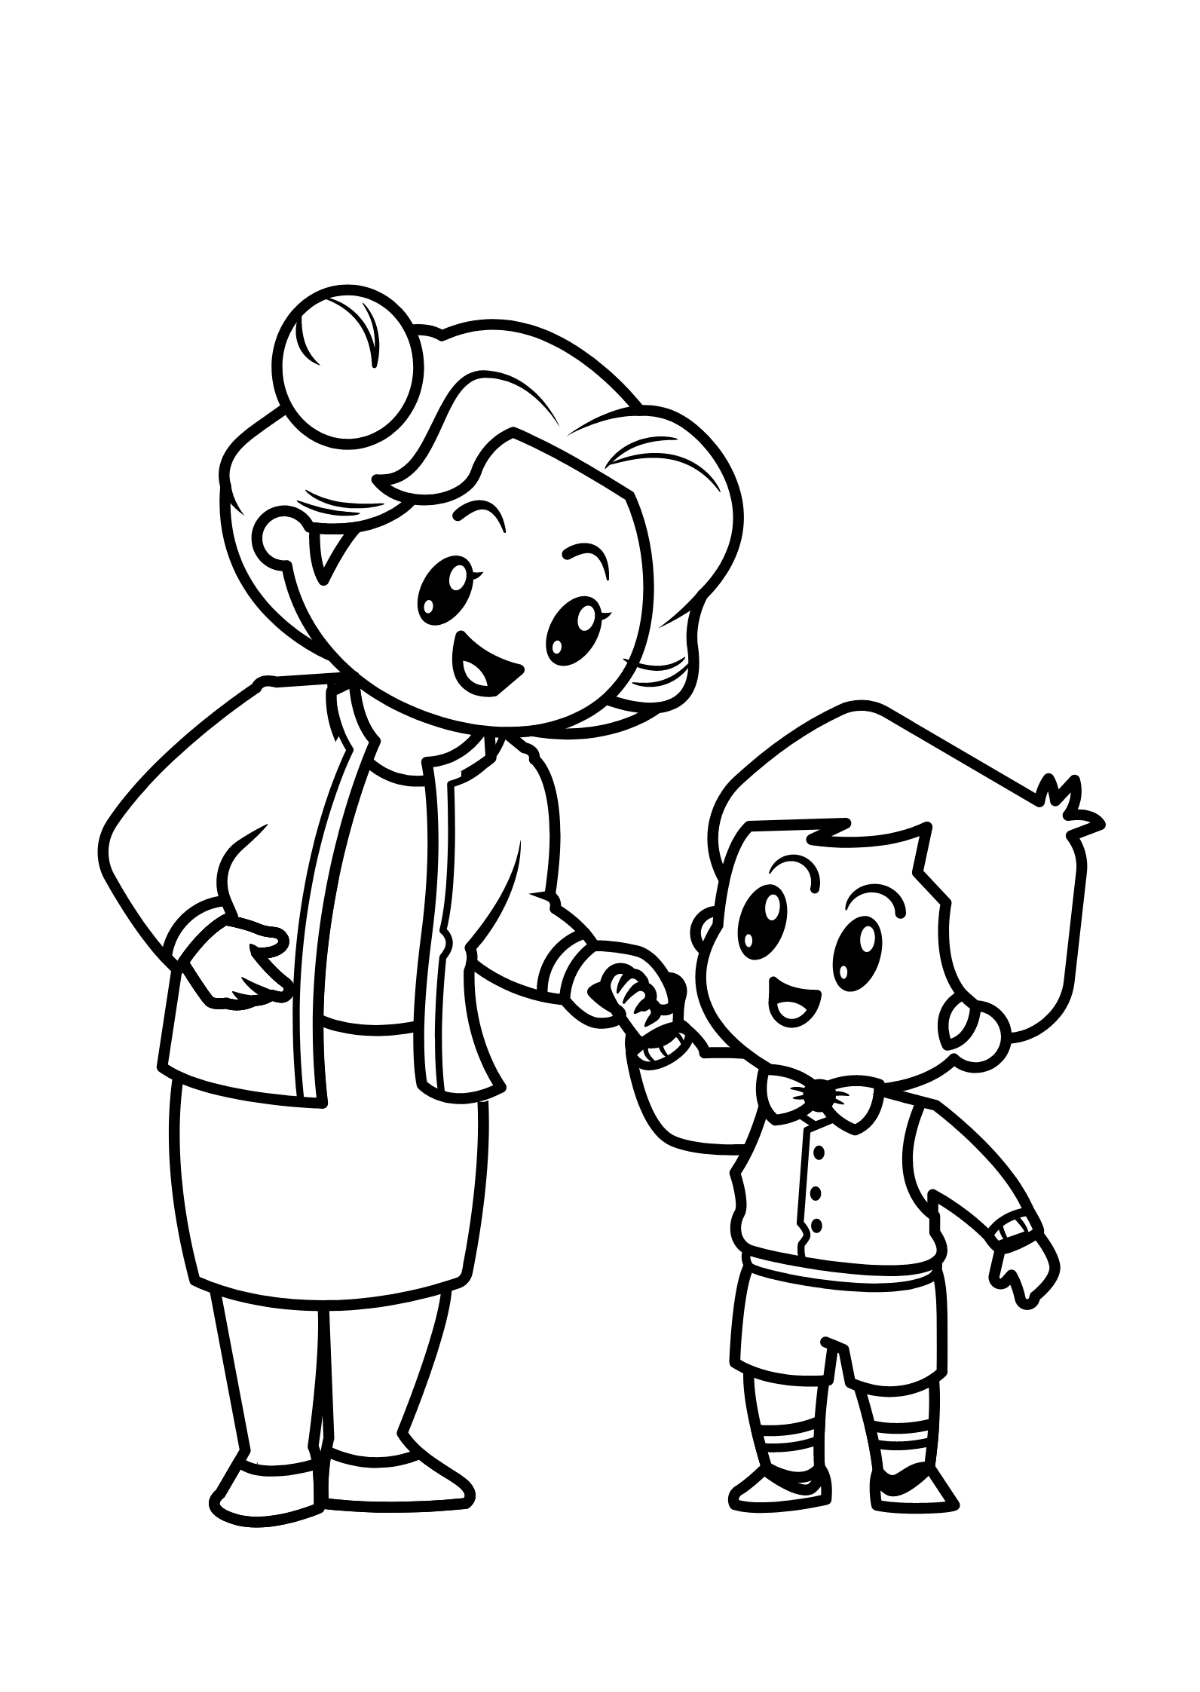 Mother's Day Cartoon Drawing Template